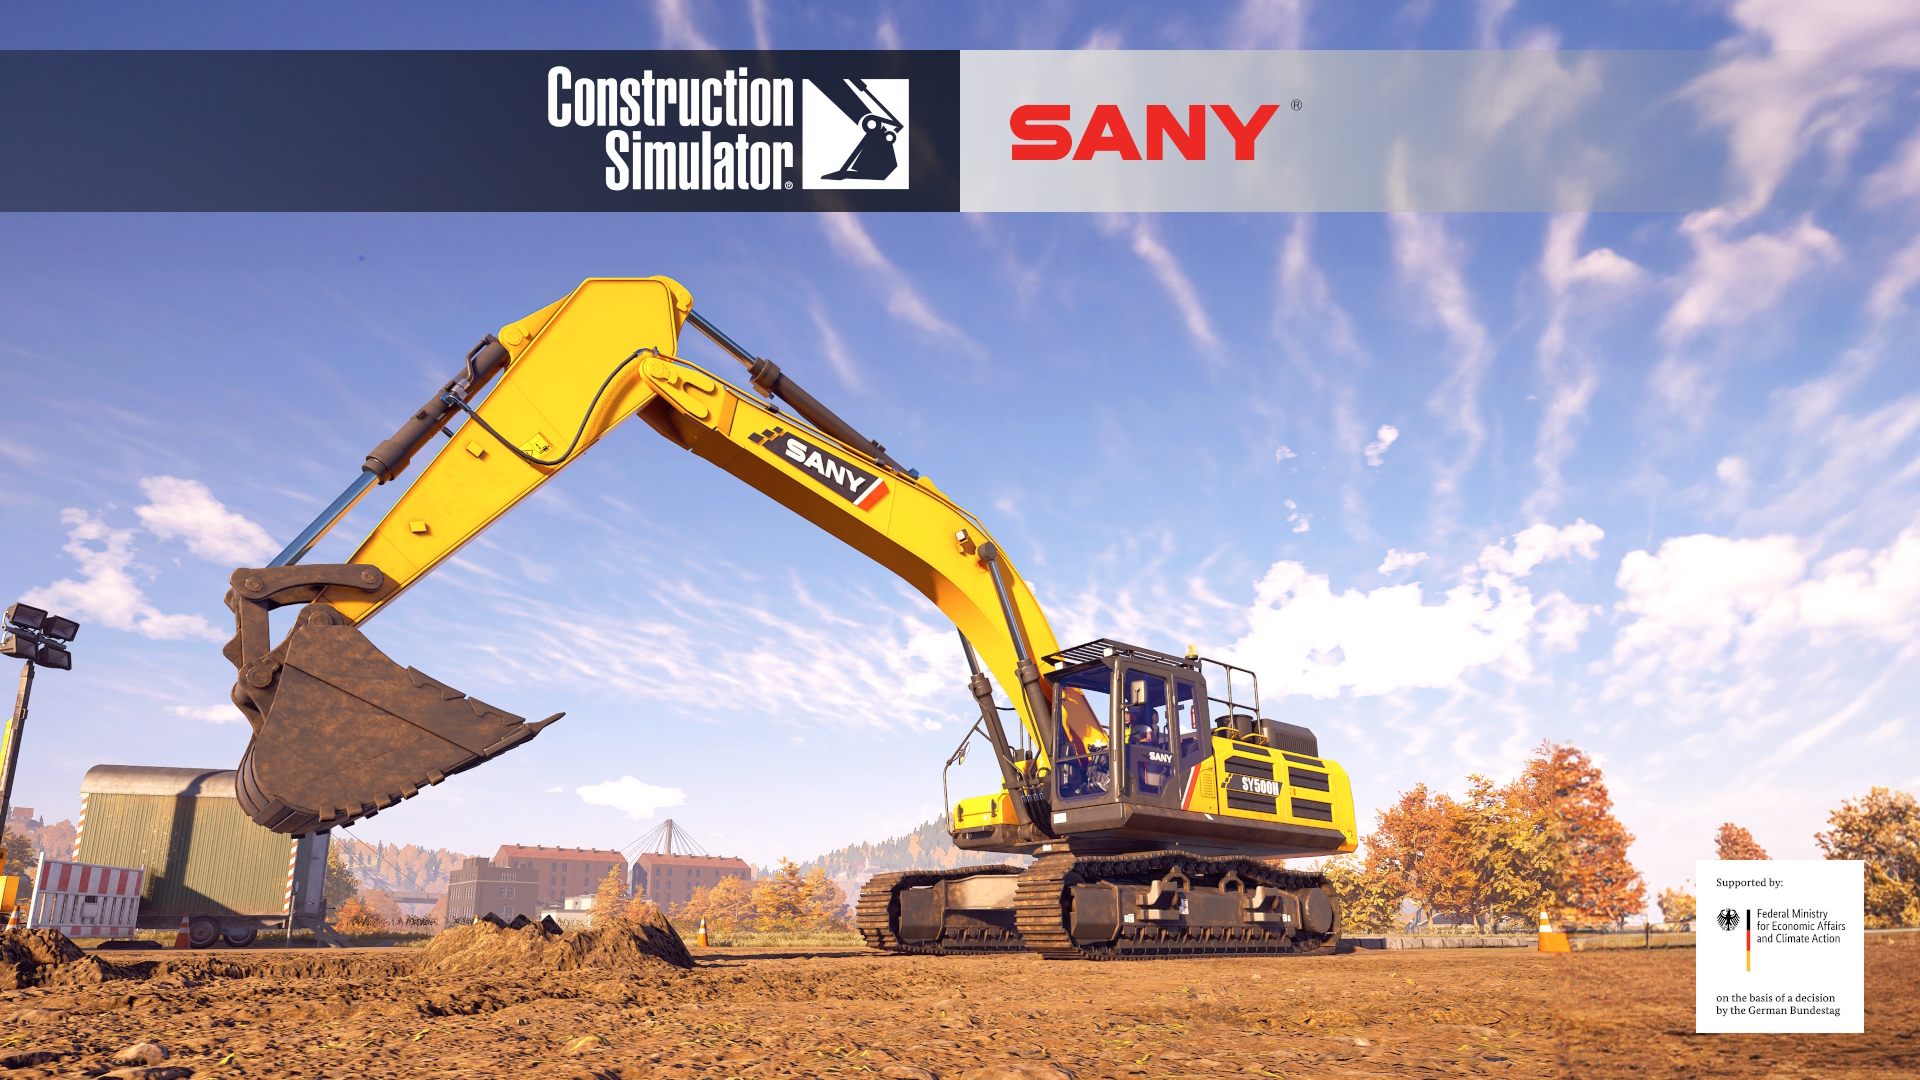 Construction Simulator® - now new construction with 15 machines Pack available! SANY